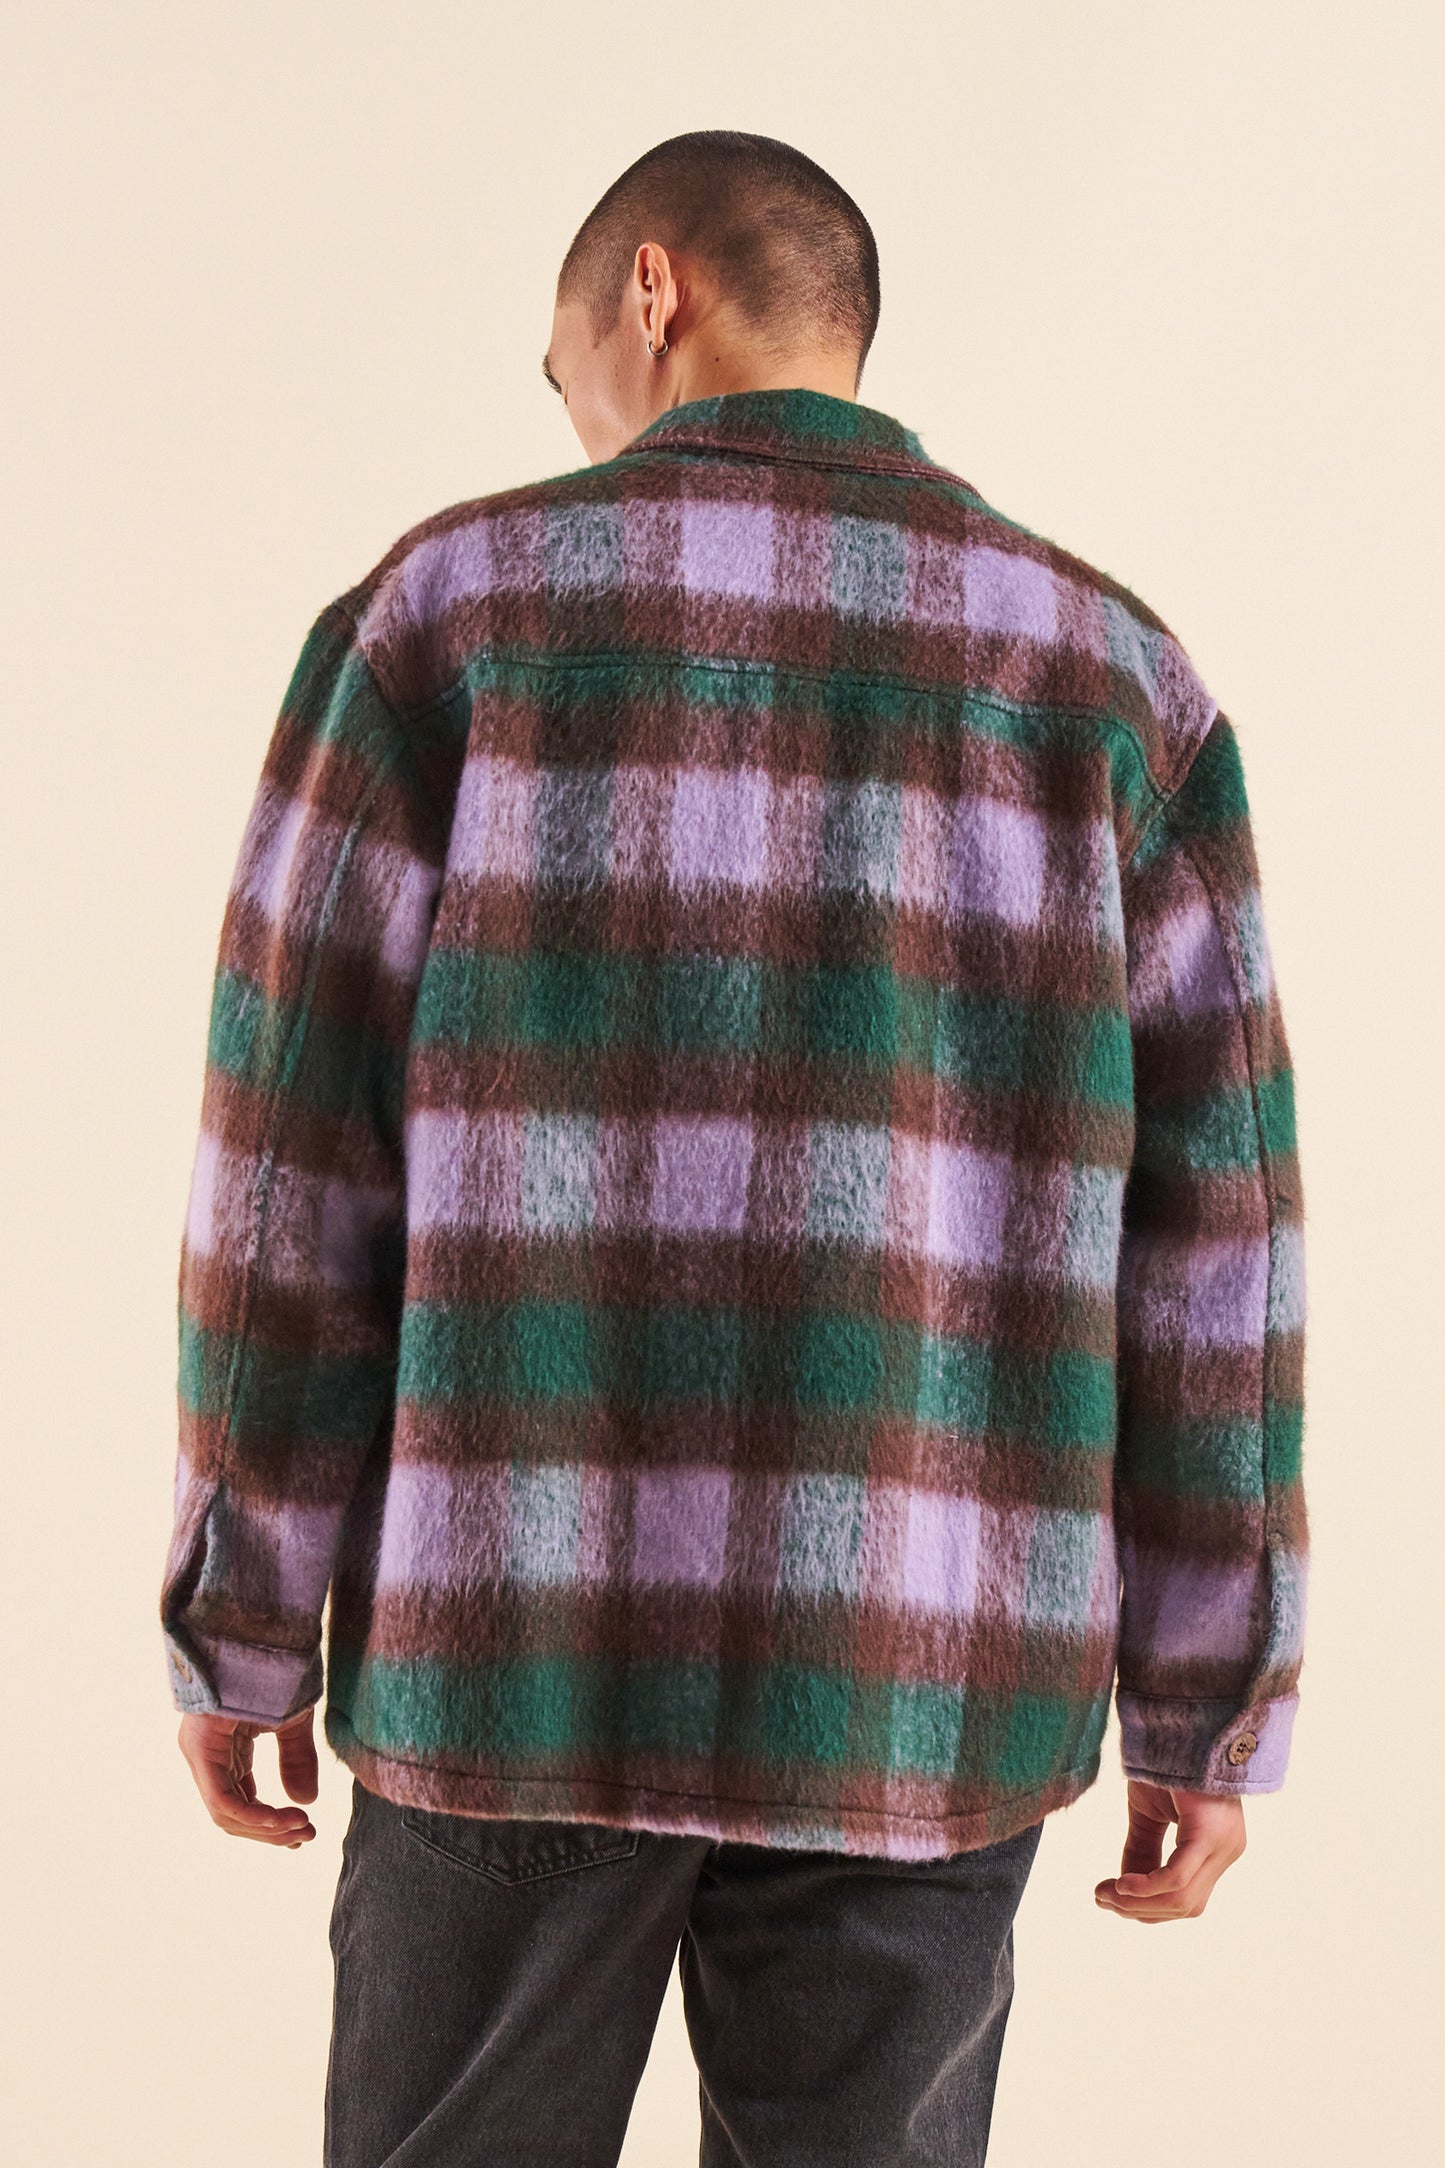 CYPRESS BRUSHED CHECK FLANNEL SHIRT